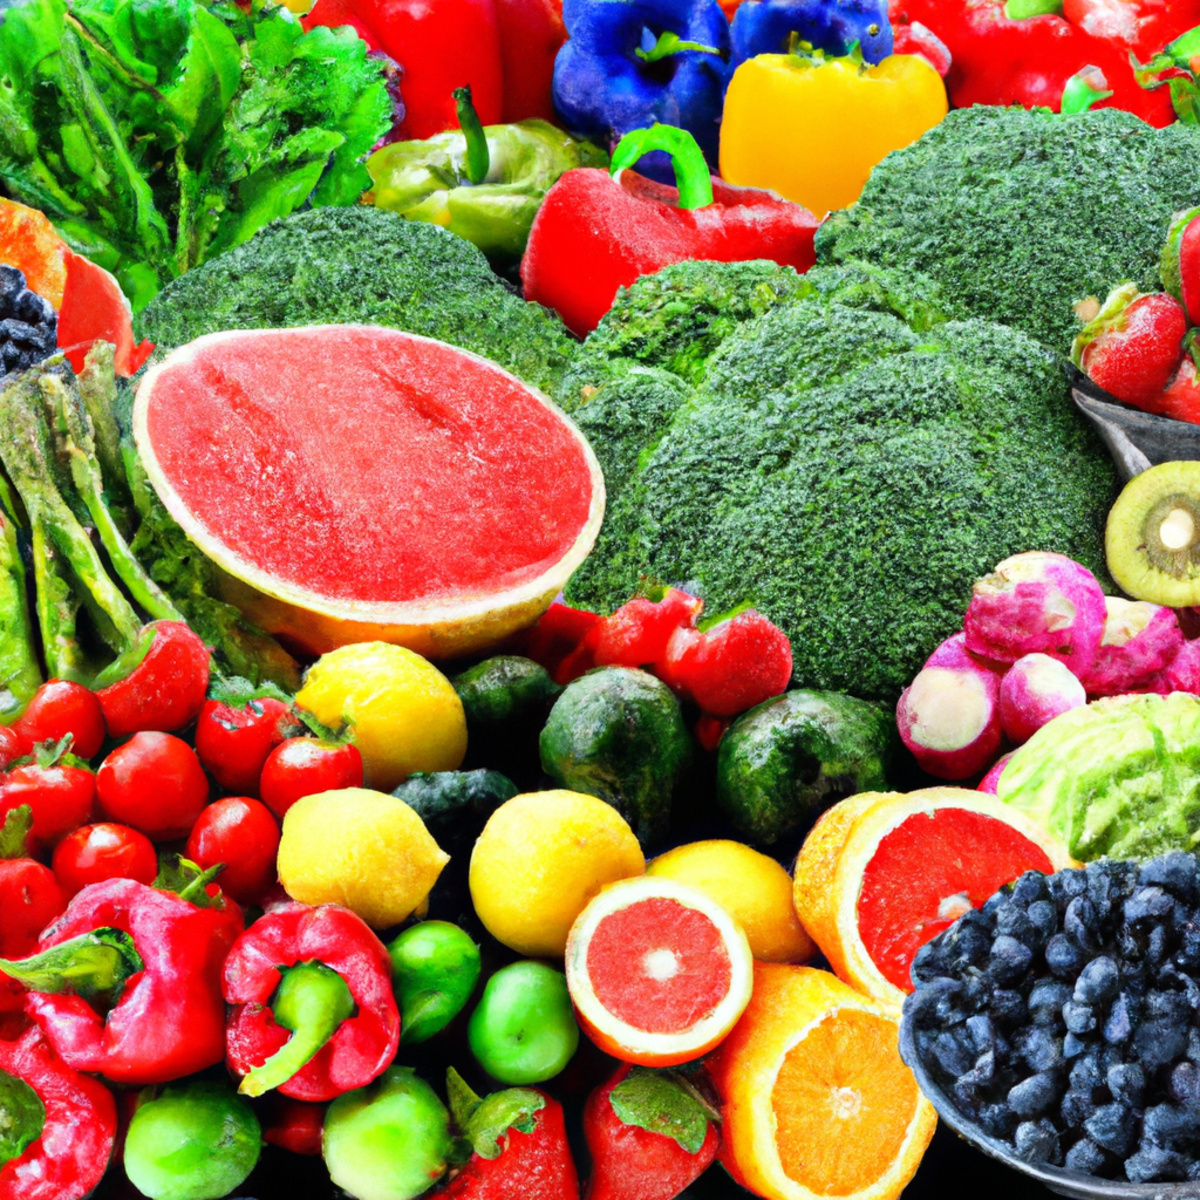 Vibrant fruits, veggies, and exercise gear symbolize the impact of diet and lifestyle on gallbladder carcinoid tumor